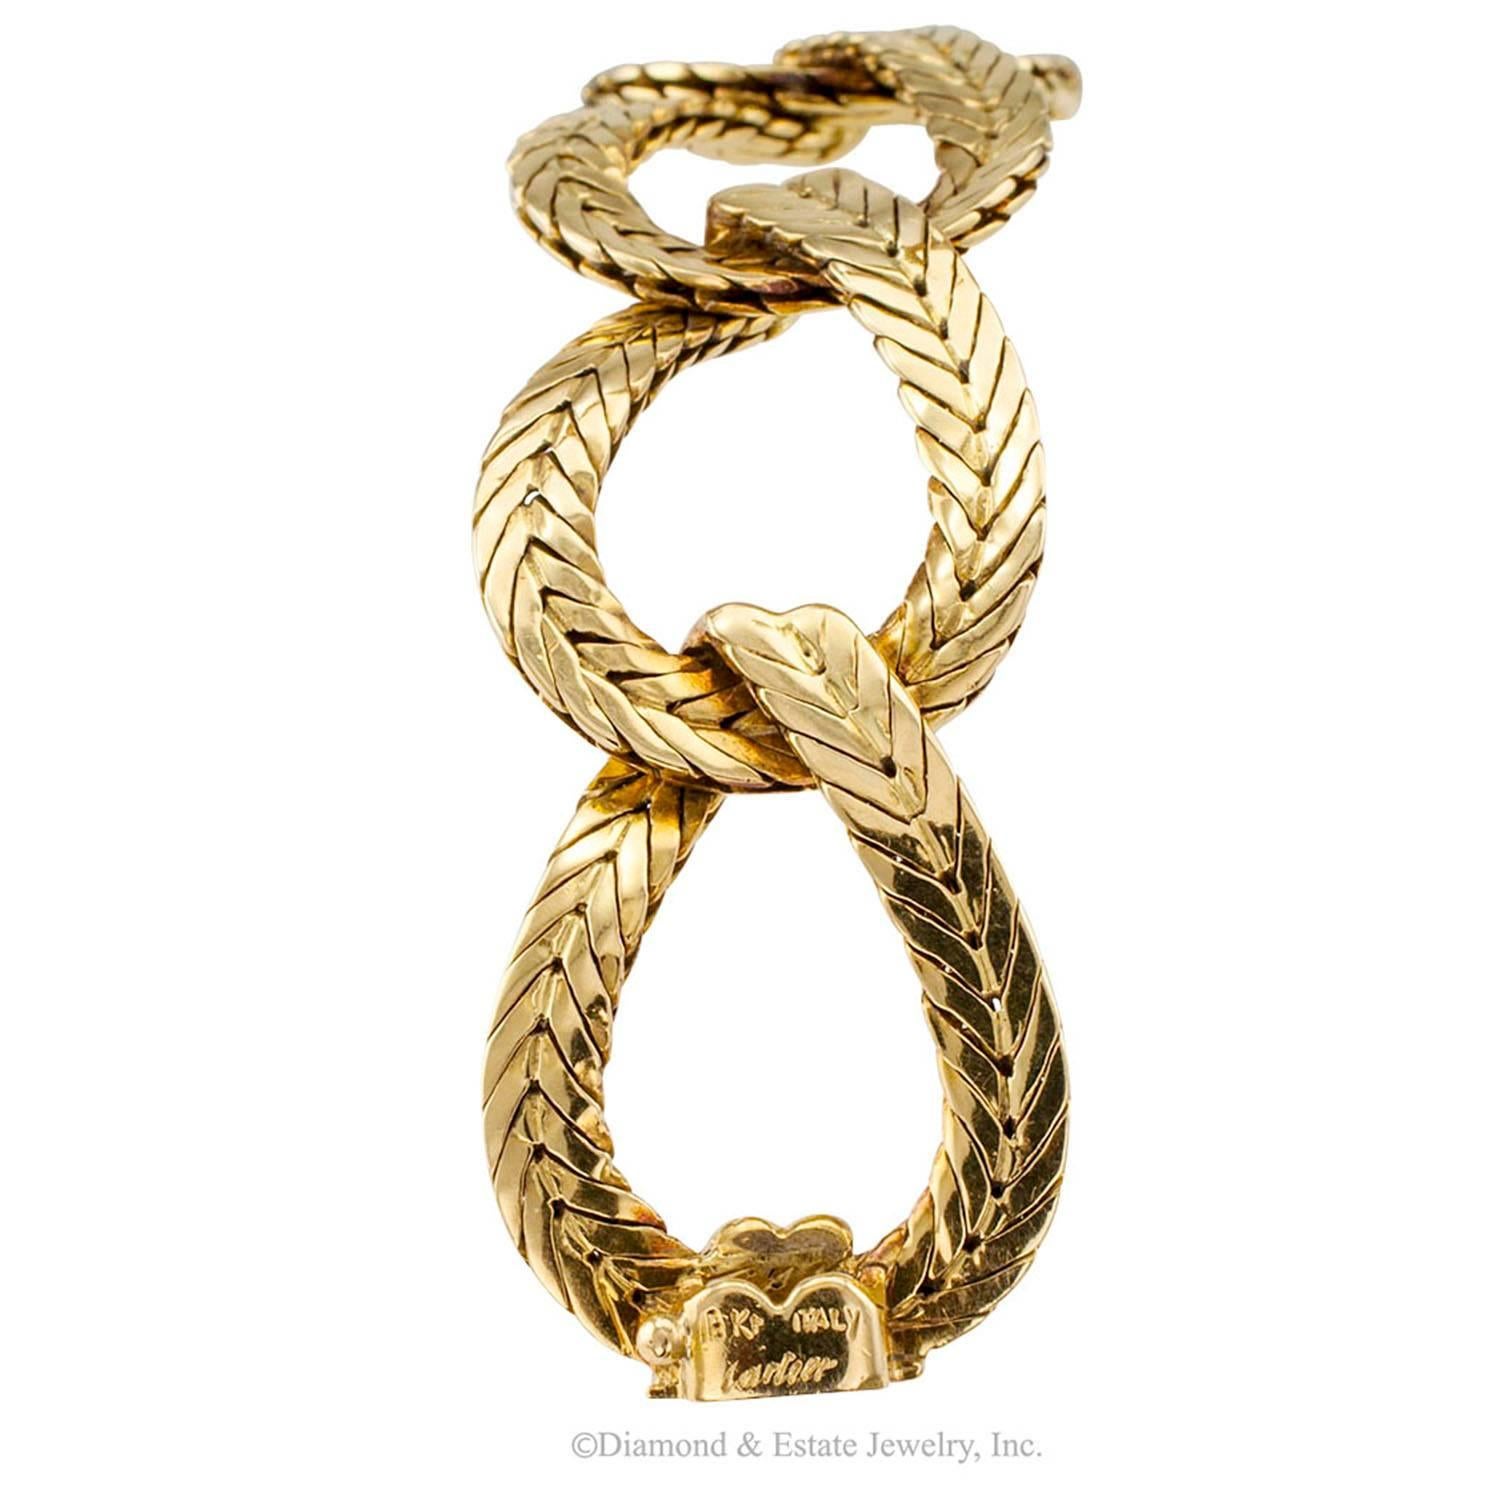 Cartier 1960s Wide Open Link Gold Bracelet

Cartier 1960s wide open link gold bracelet circa 1960.  Buttery soft and supple 18-karat gold... this elegant open link bracelet doesn't need anyone calling out its pedigree.  It speaks for itself. 